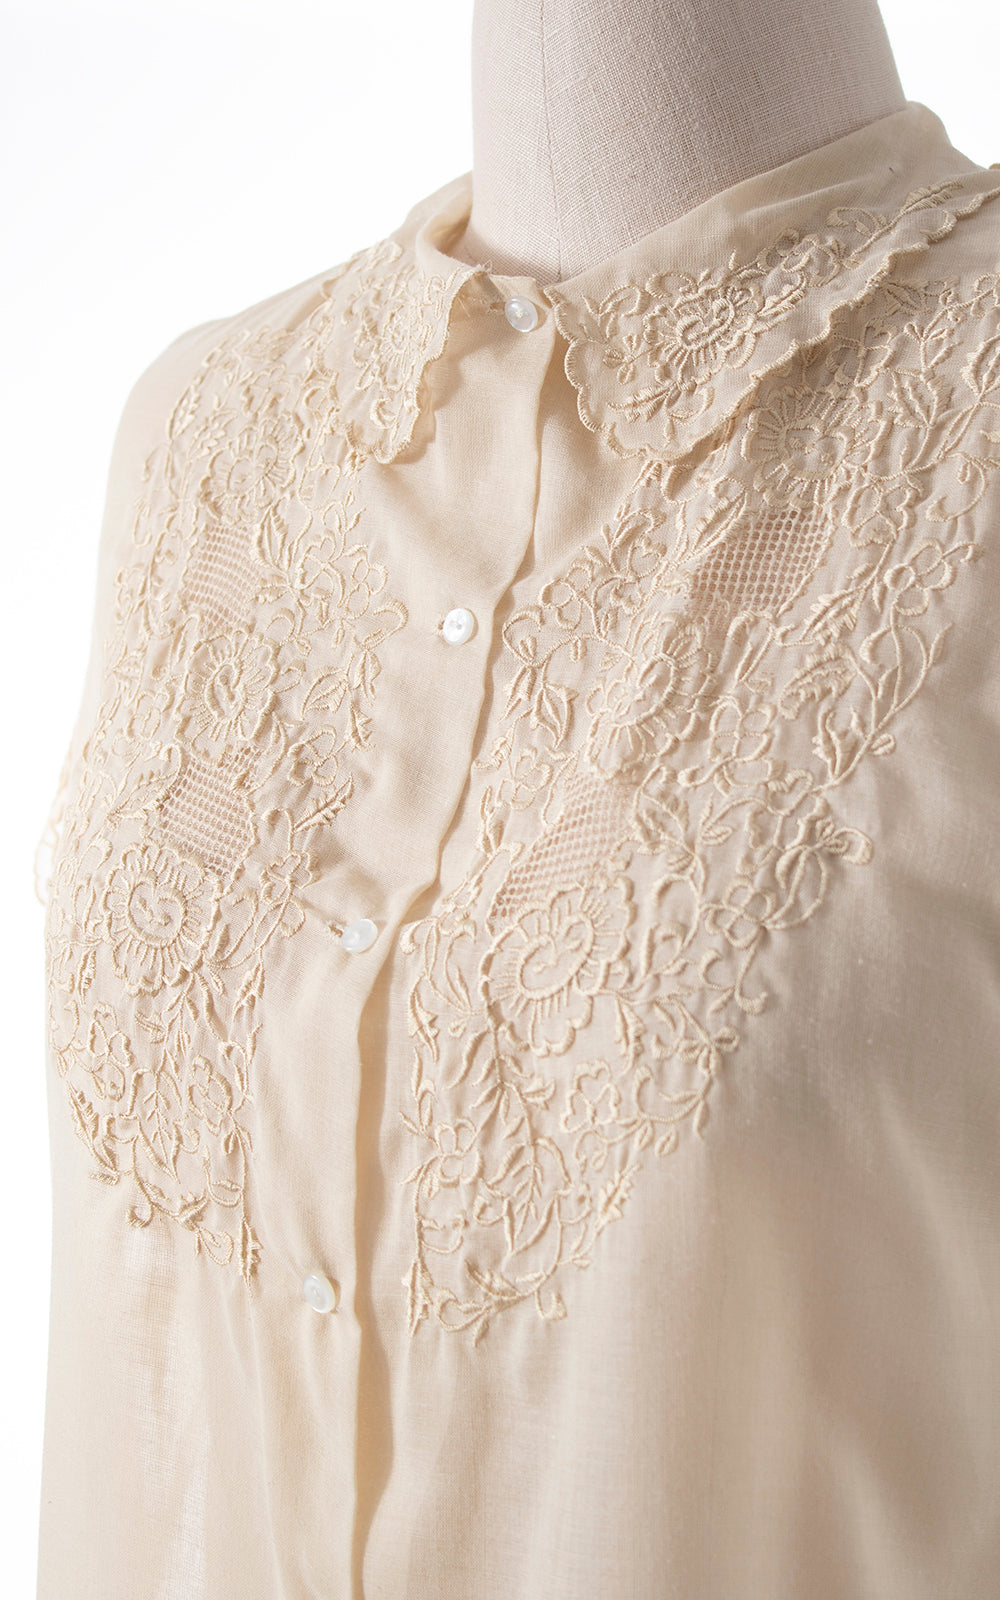 1980s Floral Embroidered Cotton Voile Blouse | large/x-large